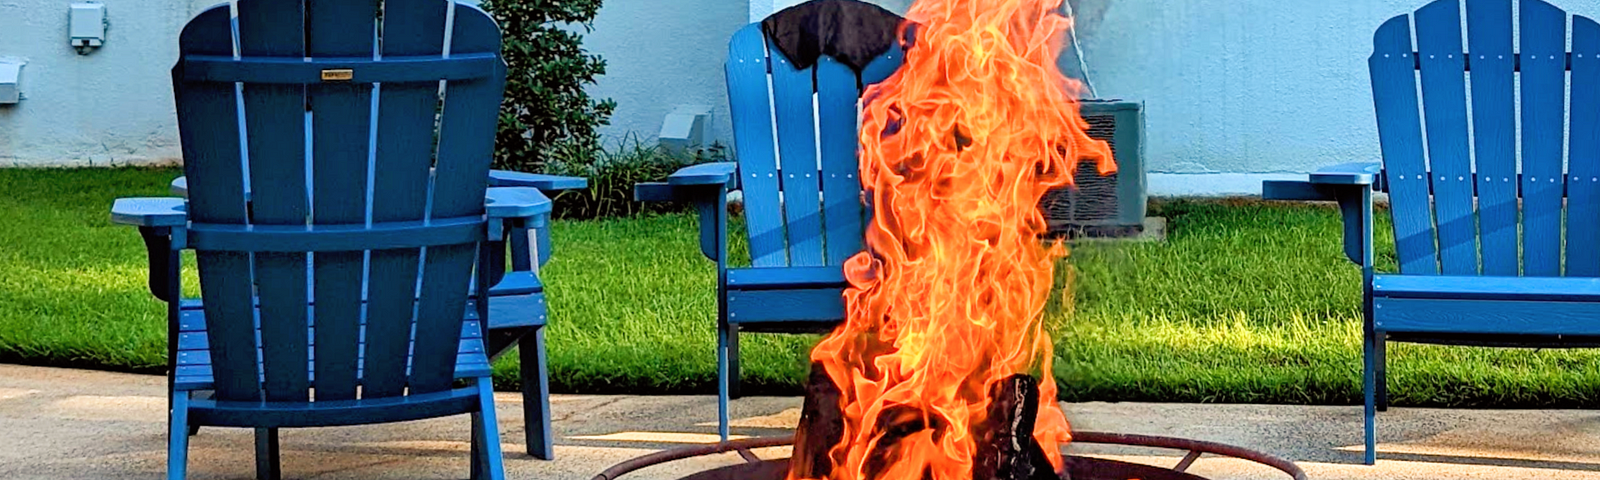 A fire pit with stars and moons on it roaring with fire and 3 blue adirondack chairs sit in the background on a patio close to a green patch of grass and white building